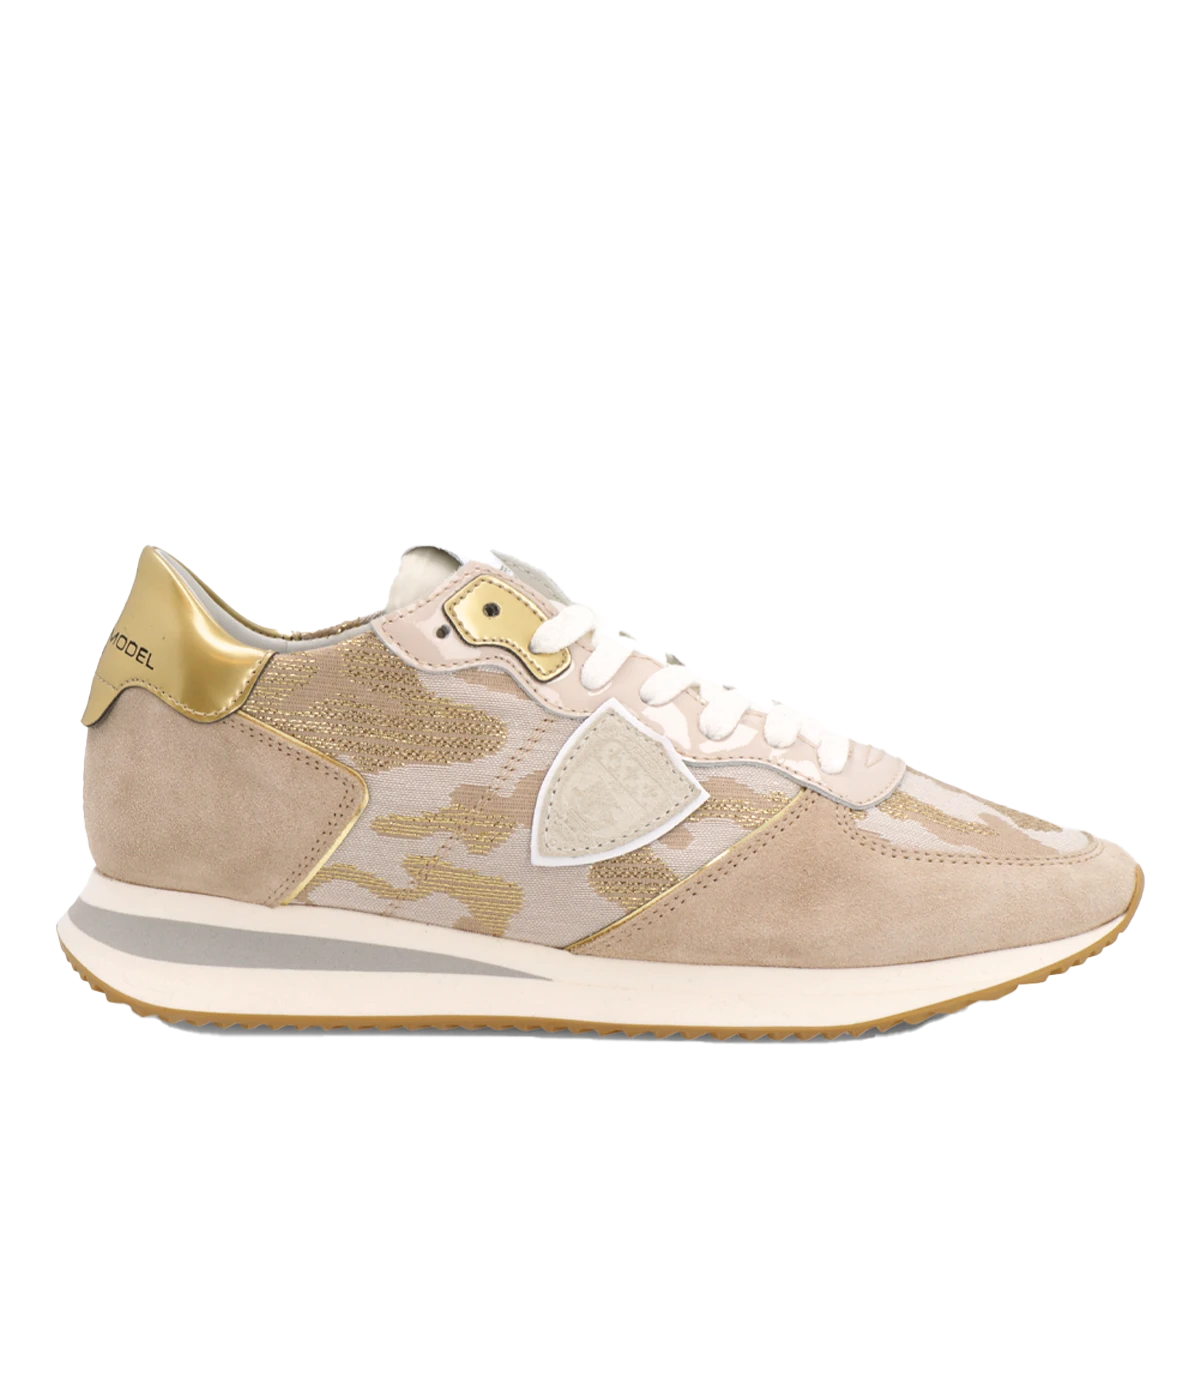 TRPX Low Woman Sneaker in Camou Lamine Sable